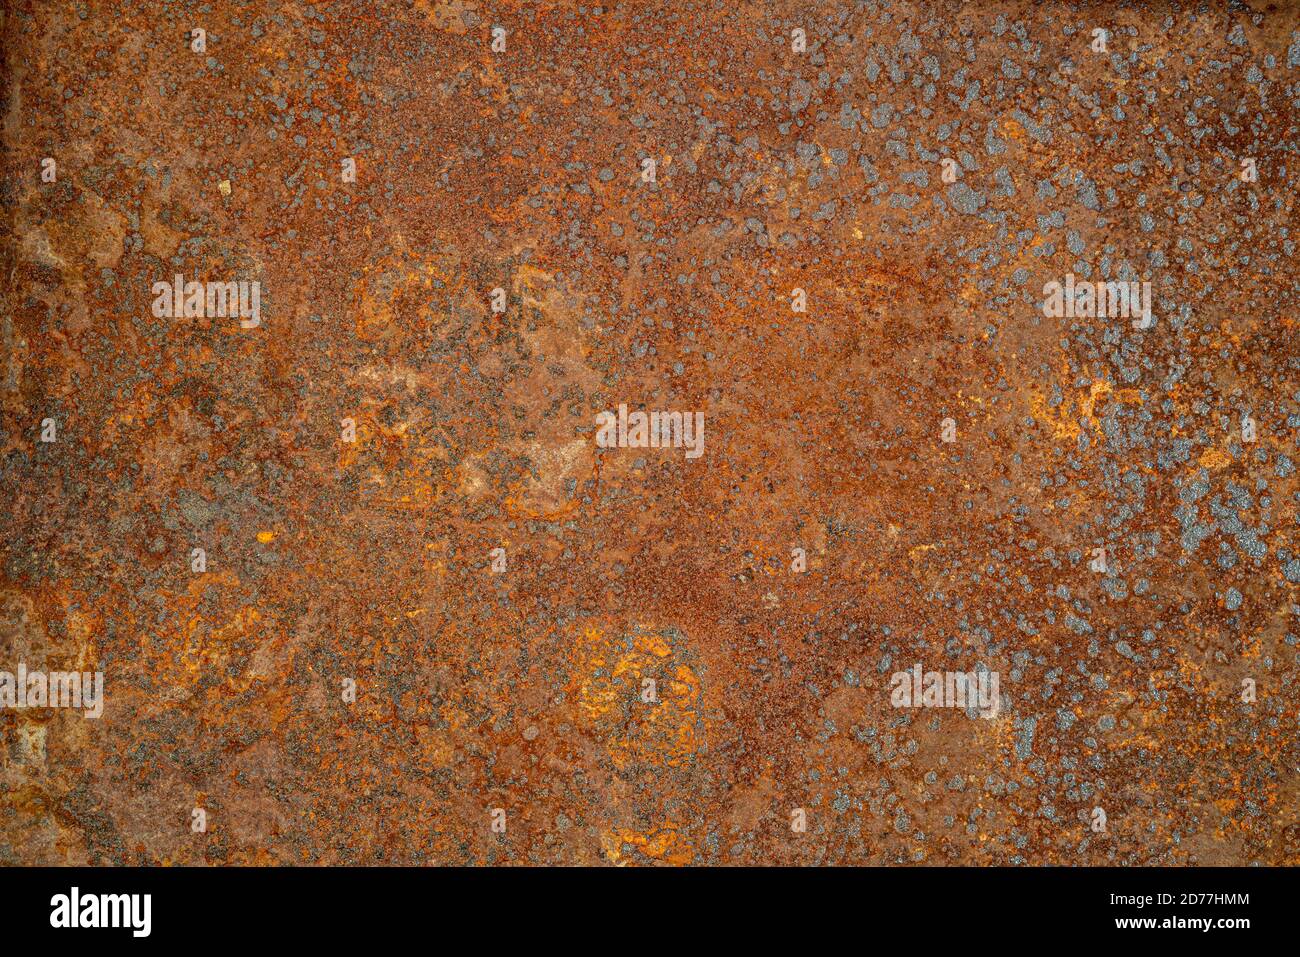 Old rusty textured metal background. Stock Photo